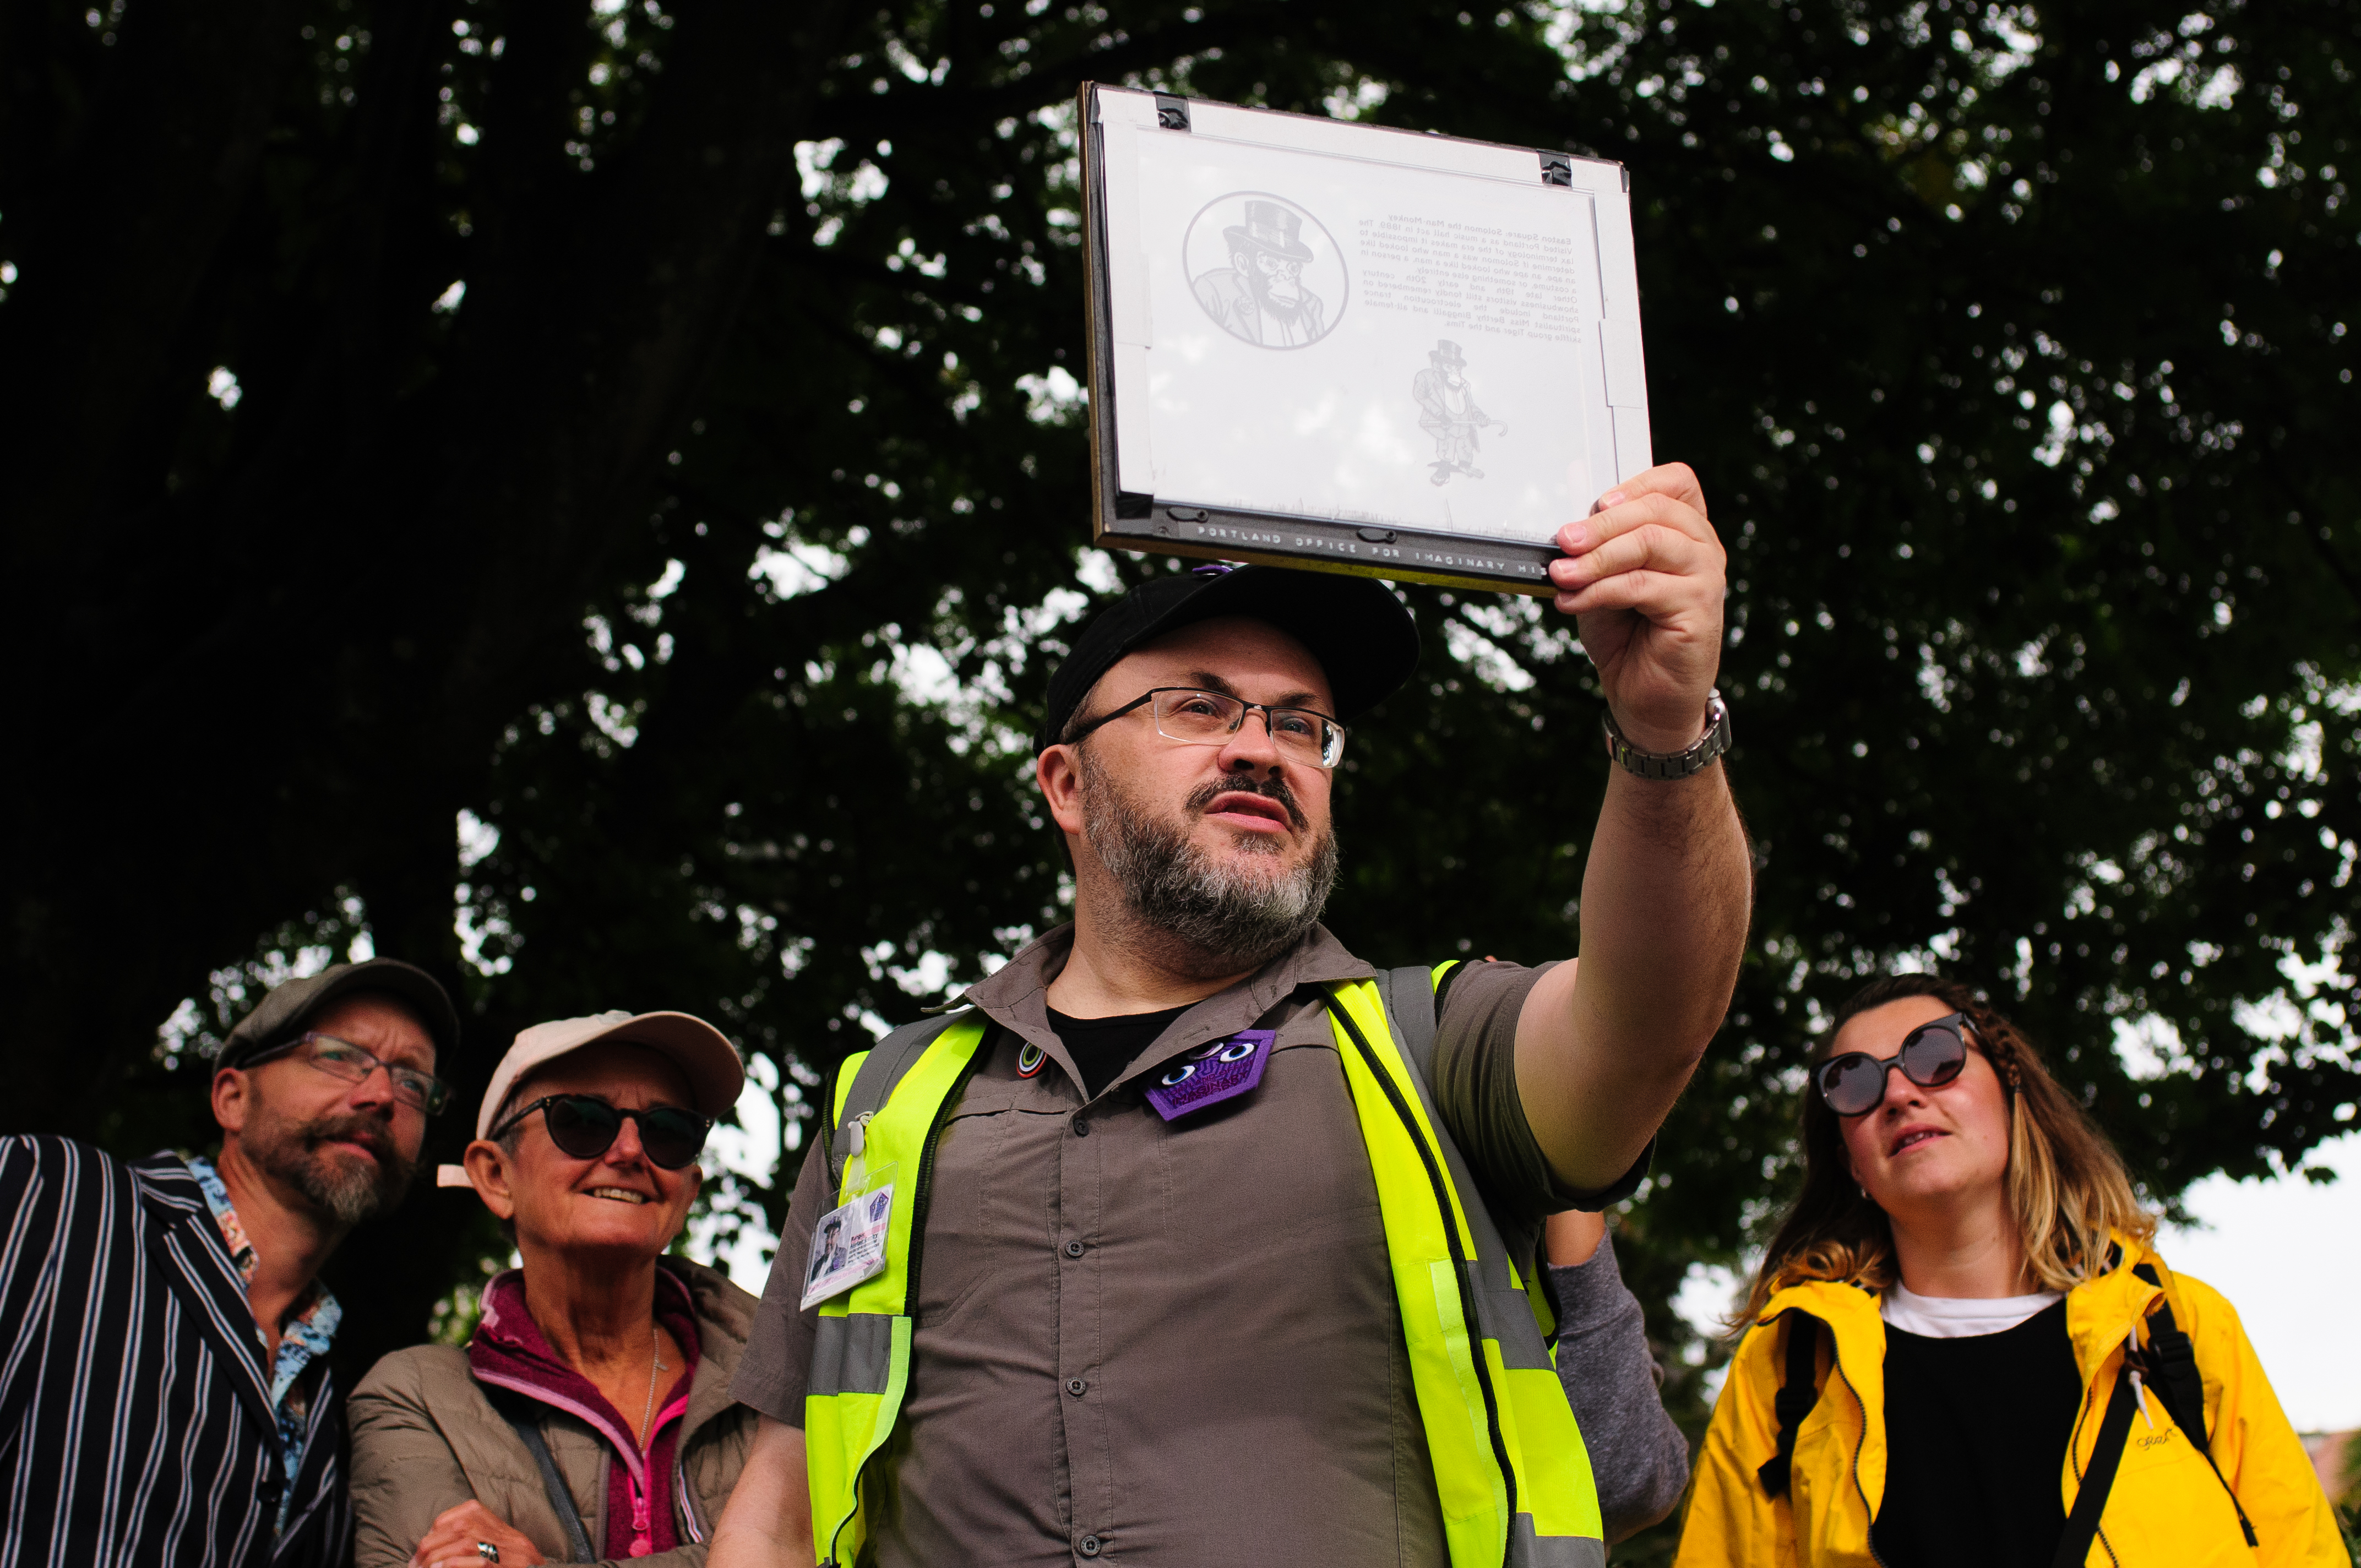 Alistair Gentry dressed as an Imaginary history ranger, holding up a frame with a transparency inside it. he and three other people are looking through it.